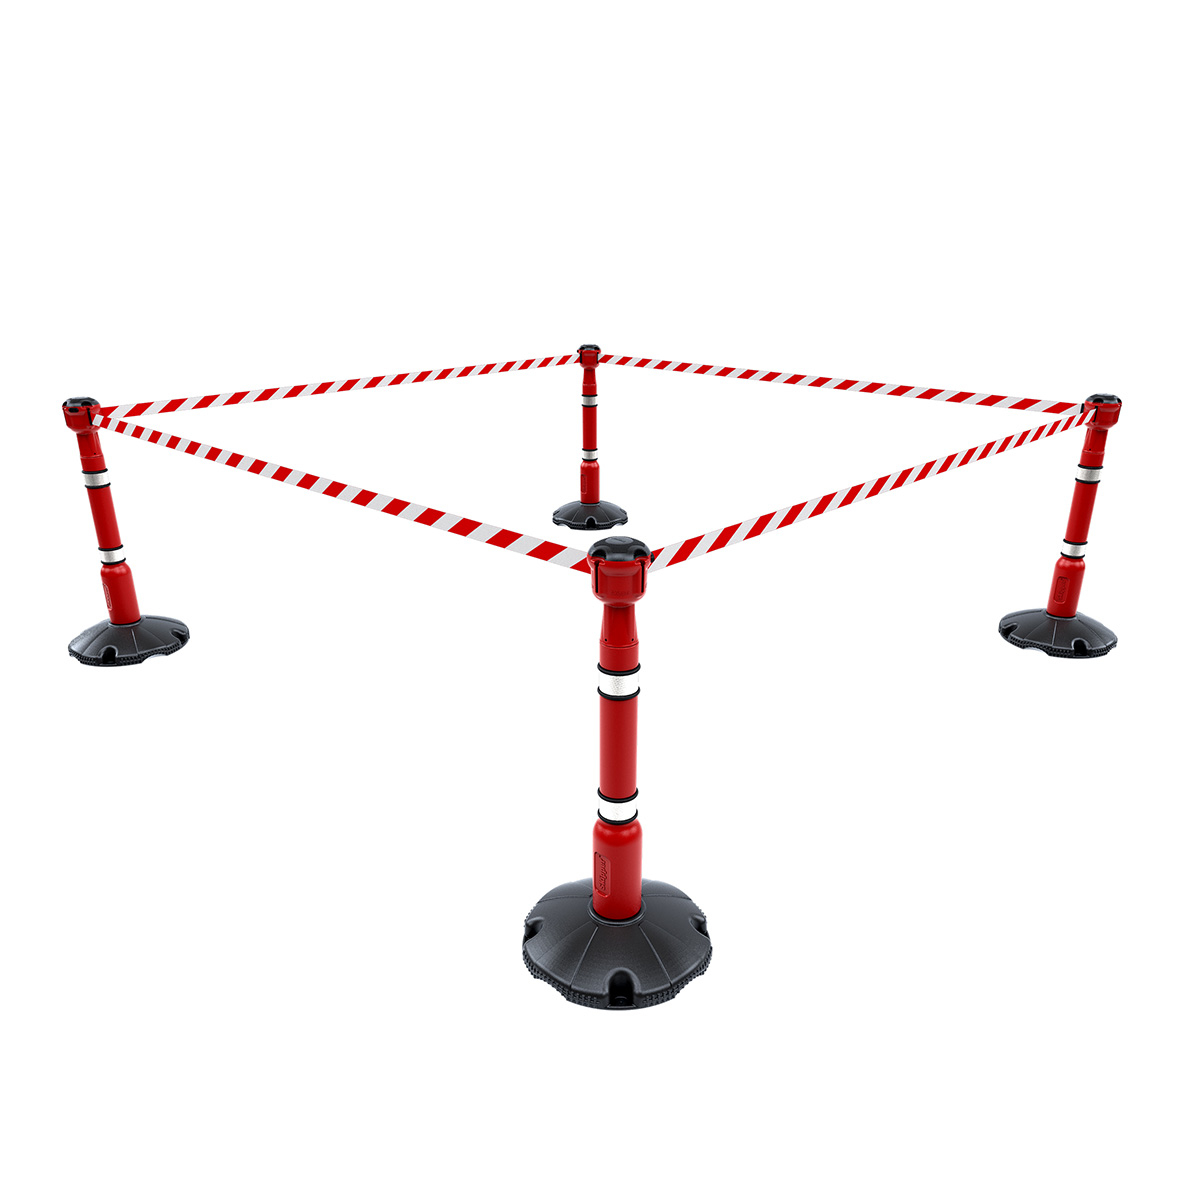 Skipper 36m Retractable Safety Barriers - Red Posts And Red/White Chevron Safety Webbing